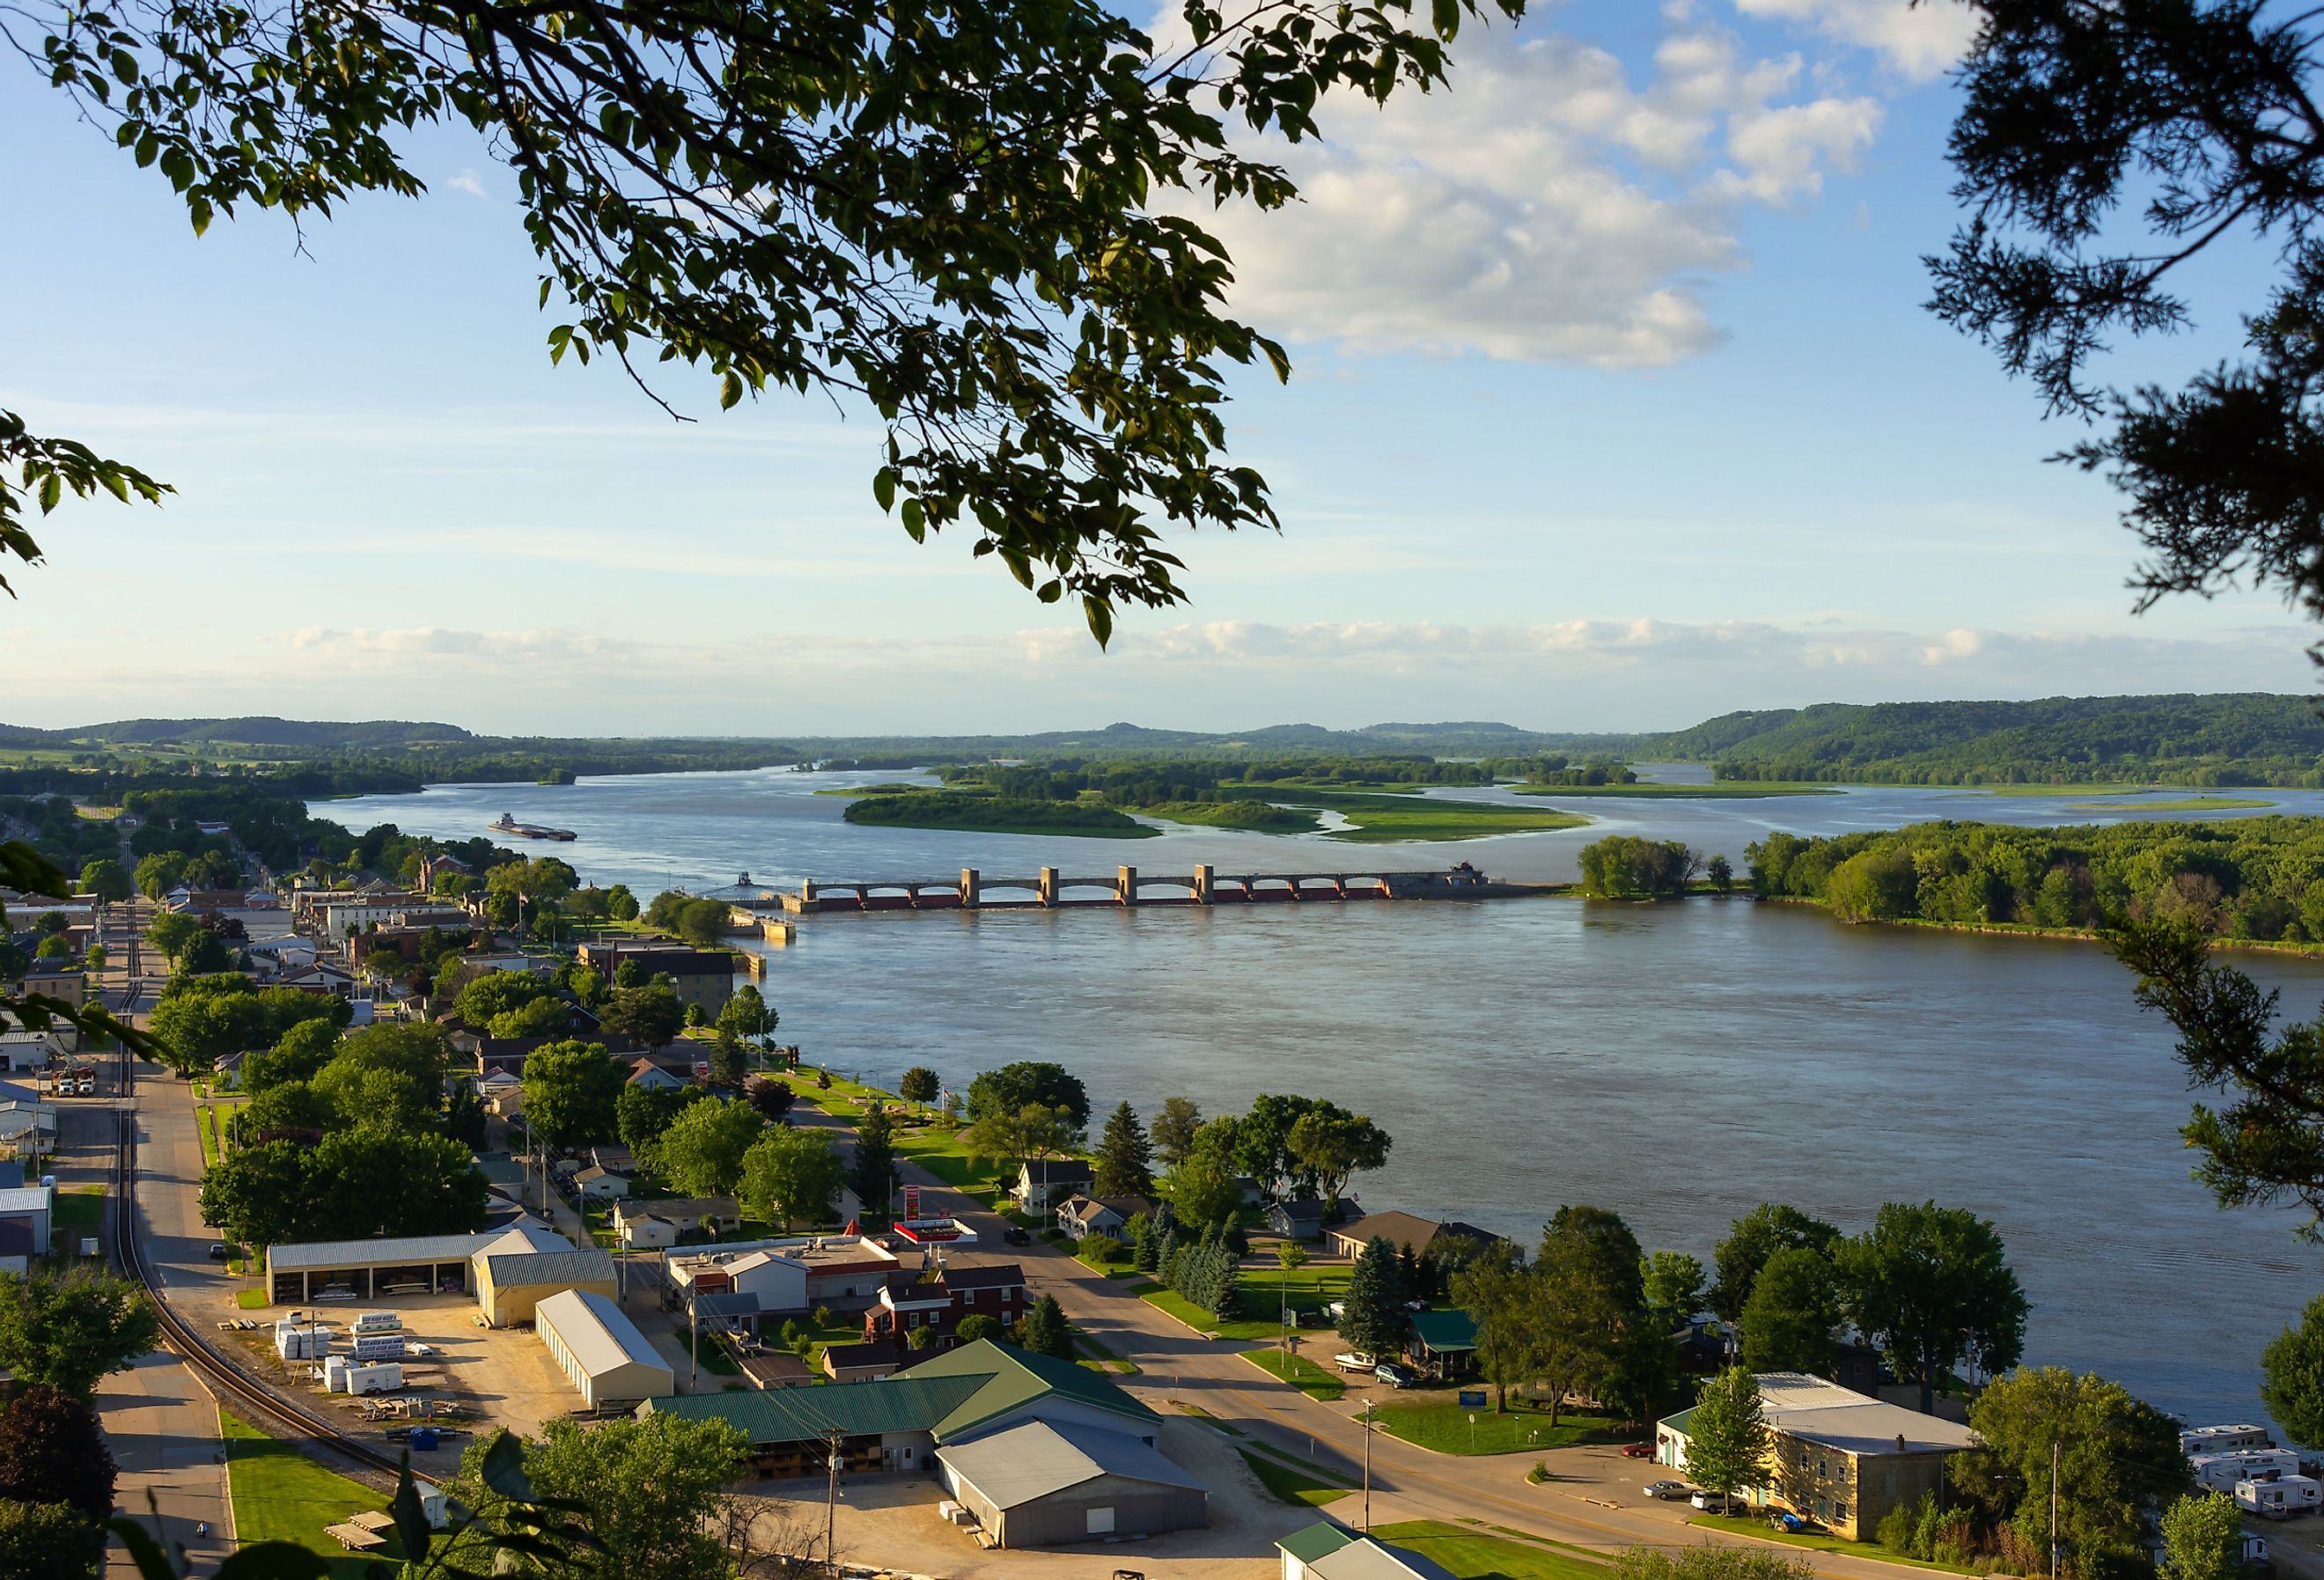 Overlooking the town of Bellevue and the Mississippi River, Bellevue, Iowa.